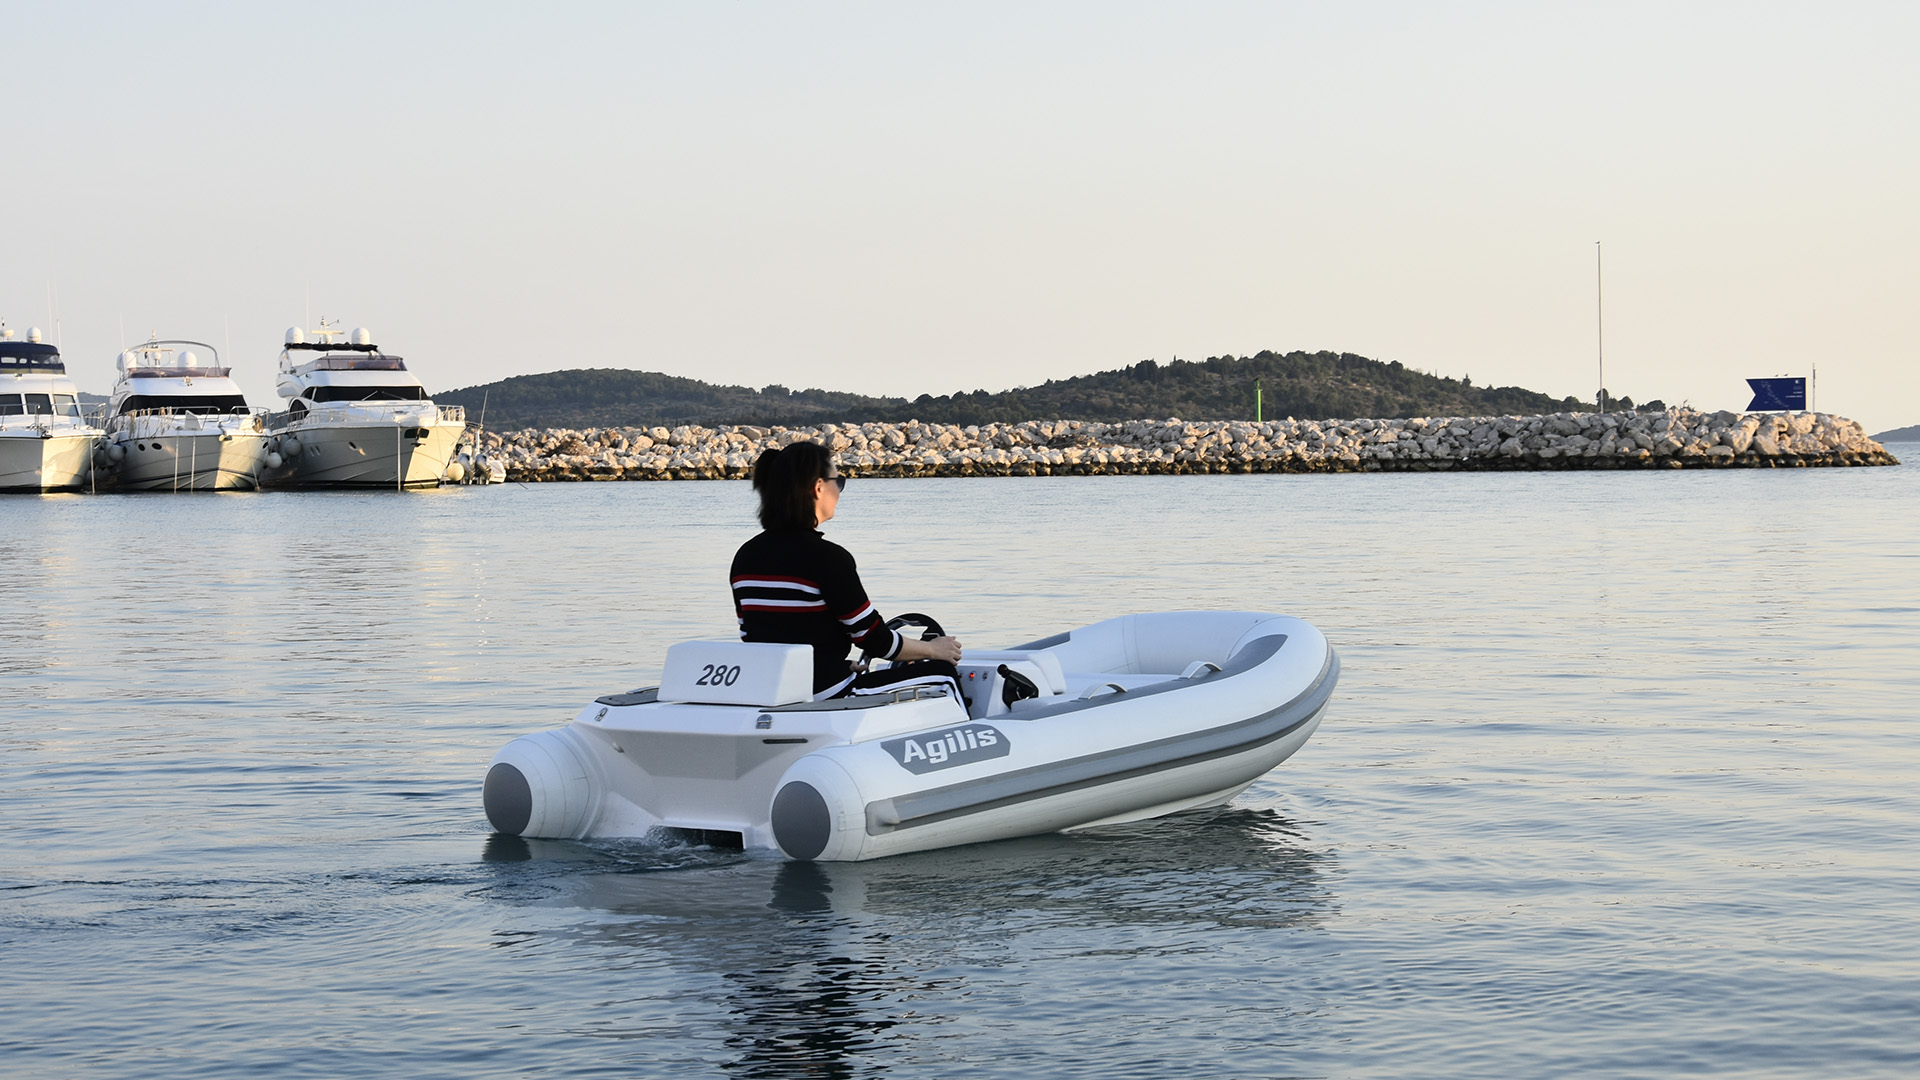 Agilis 280 - Luxury small boat for great adventures